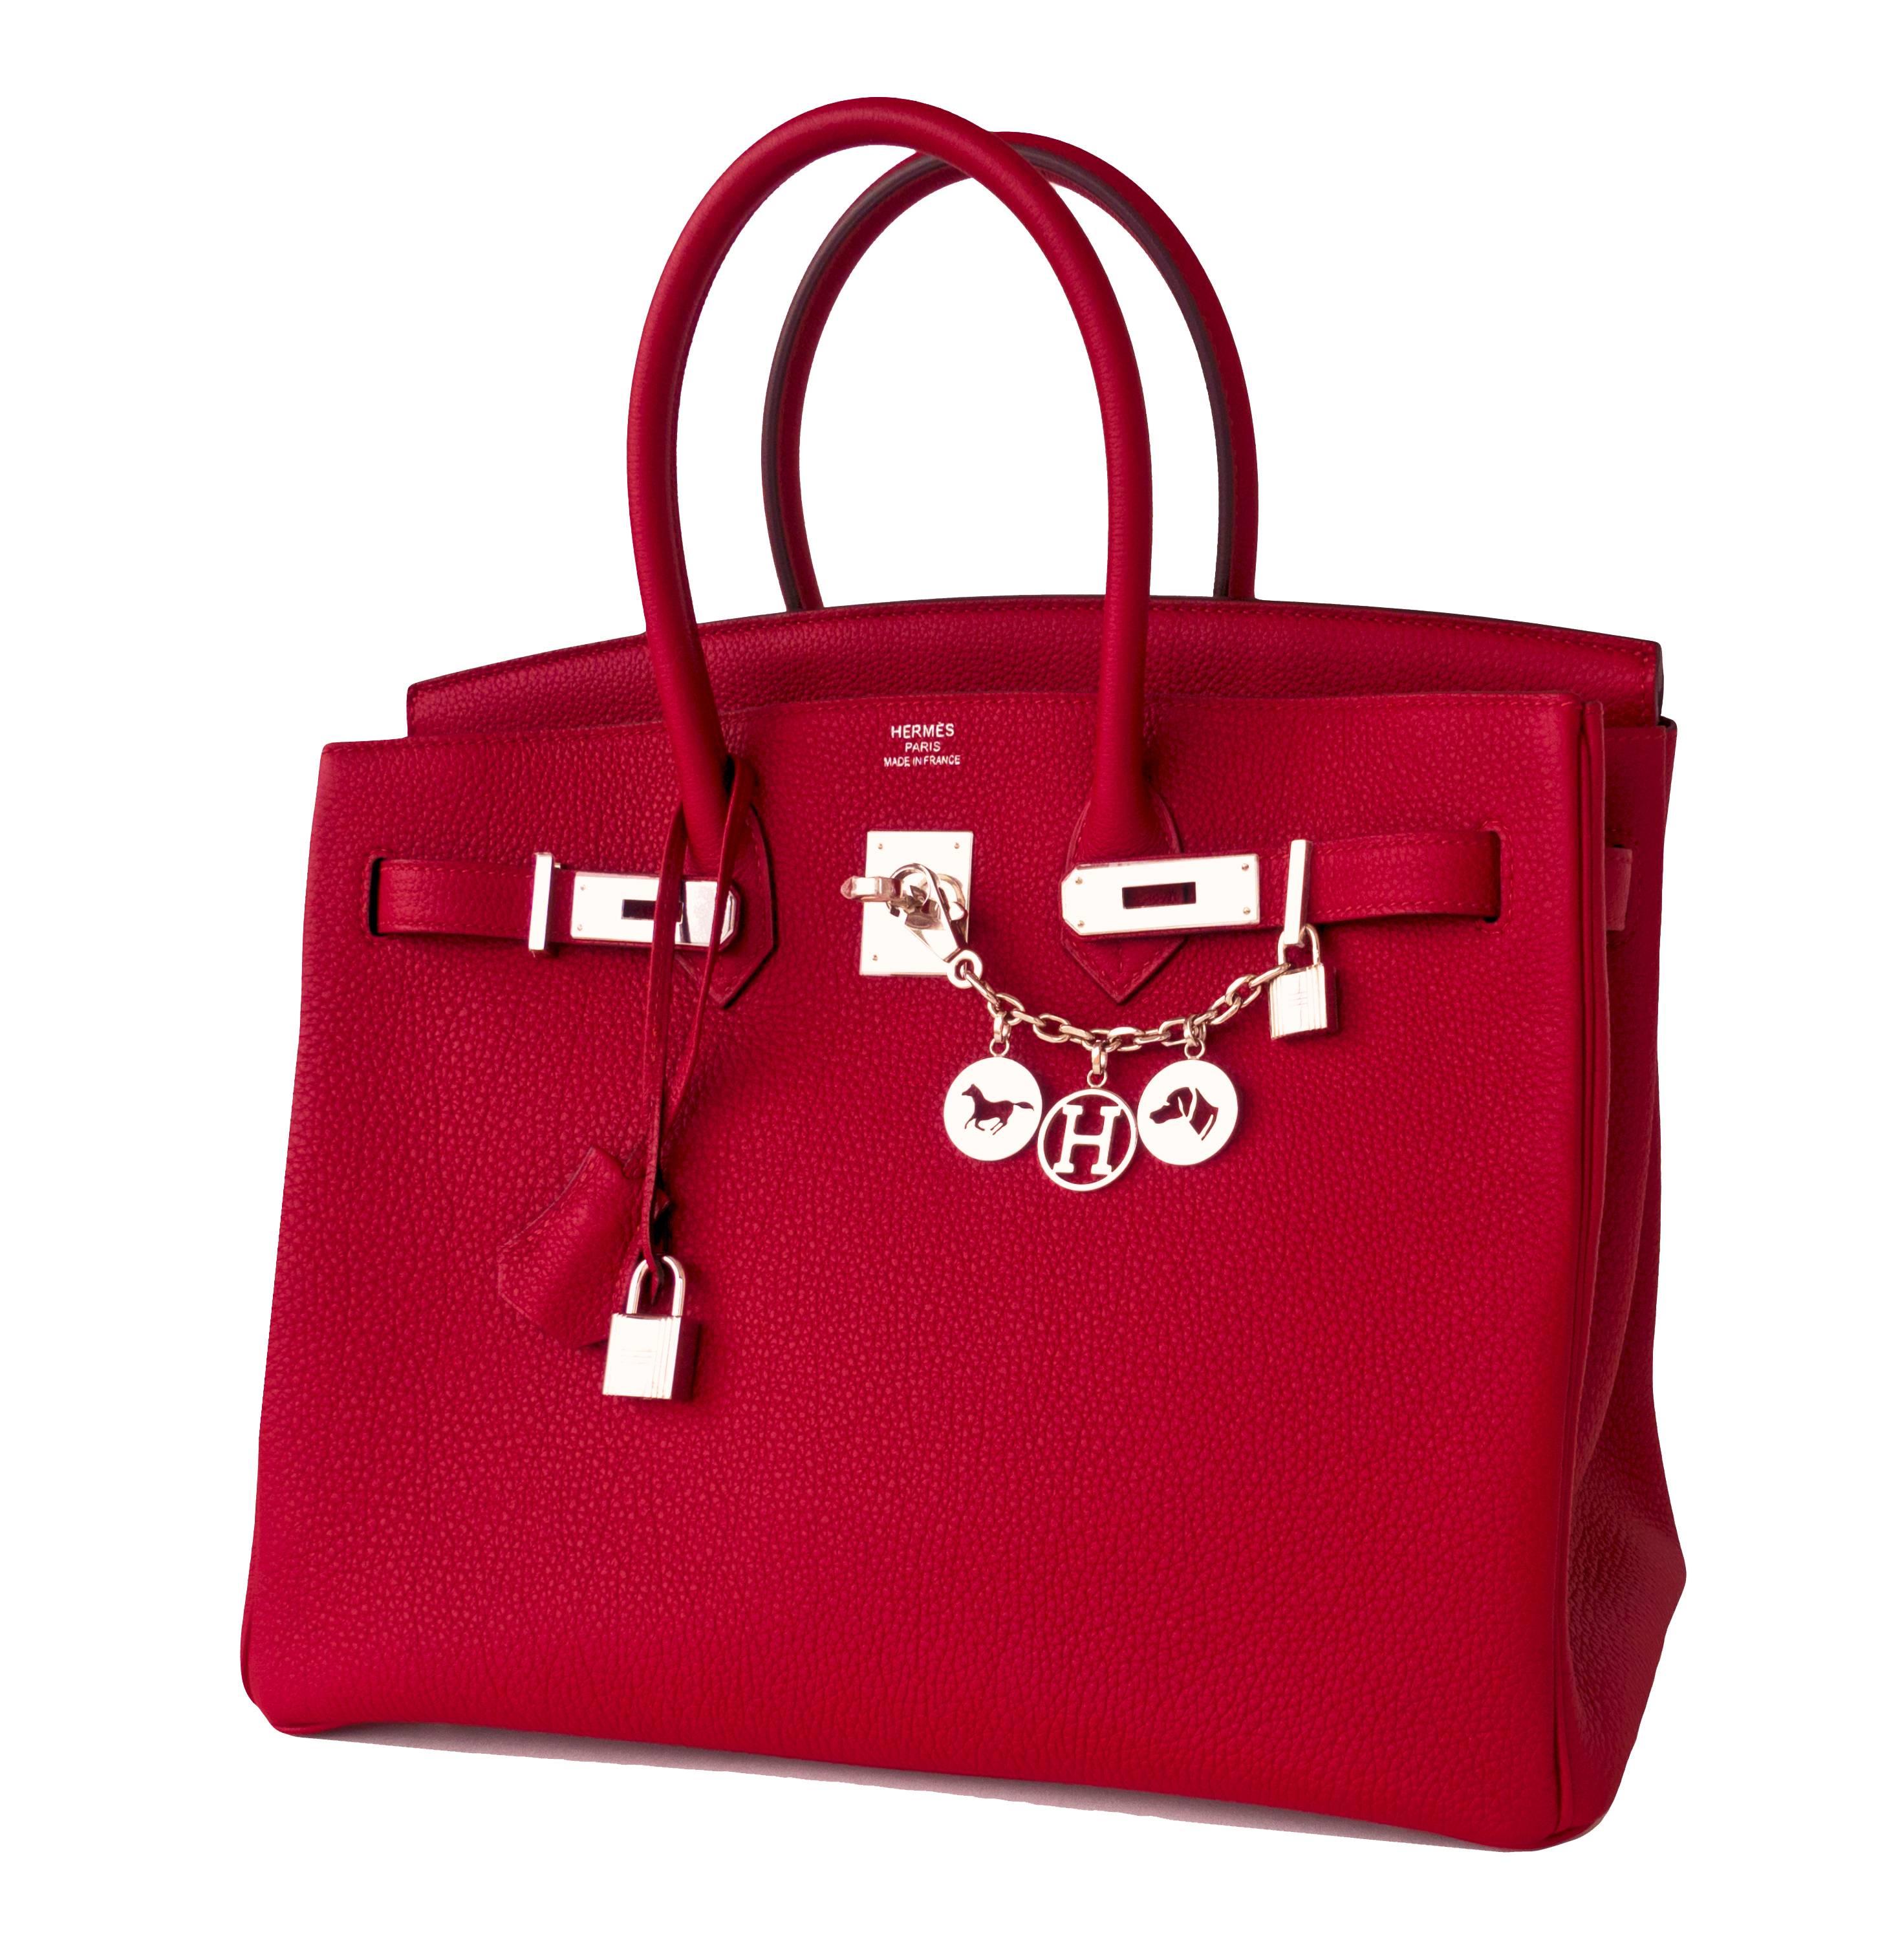 Hermes Rouge Grenat Garnet Red 35cm Birkin Togo Palladium Hardware Jewel
Brand New in Box. Store fresh. Pristine Condition (with plastic on hardware). 
Just purchased from Hermes store; bag bears new 2016 interior X stamp.
Perfect gift! Comes